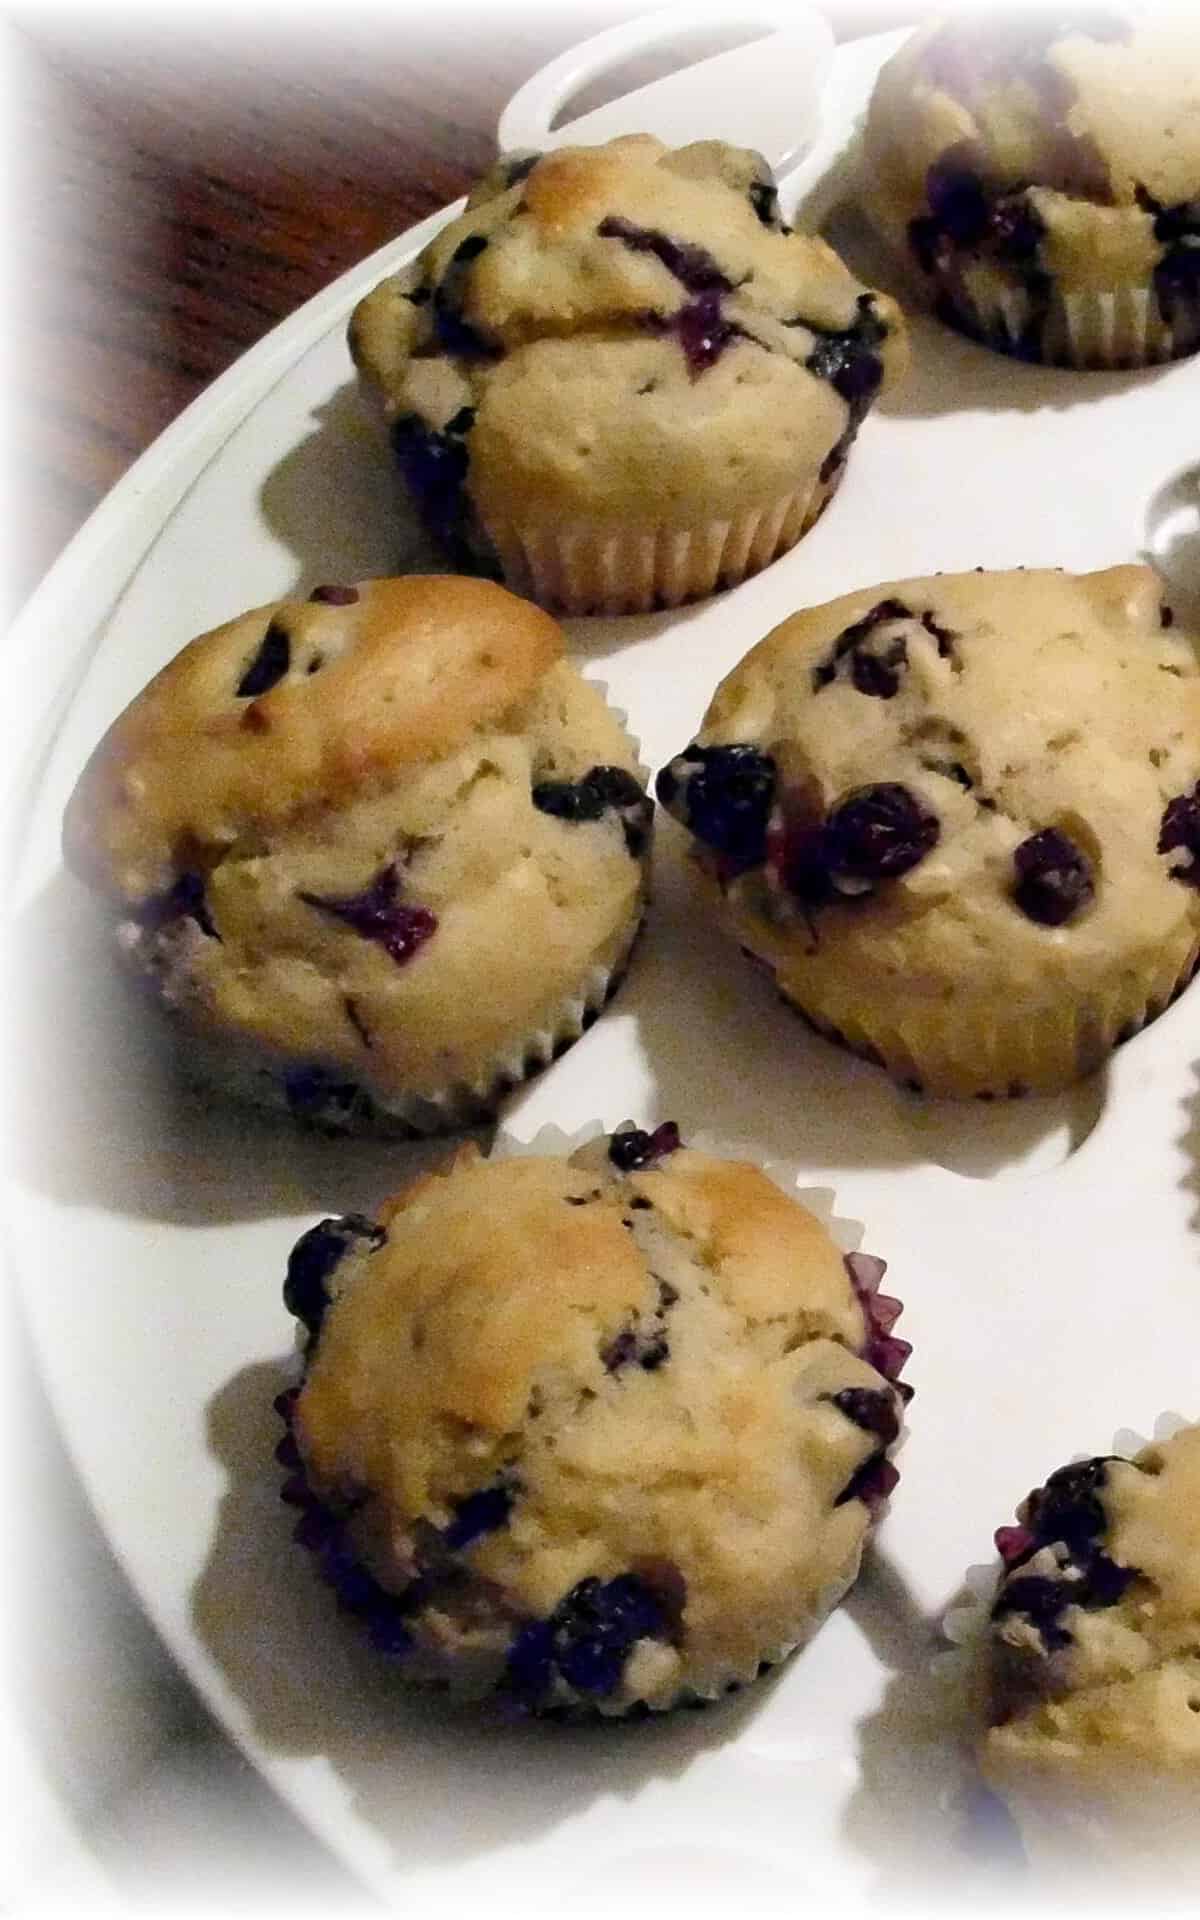  Get creative with toppings and mix-ins to make these muffins your own.